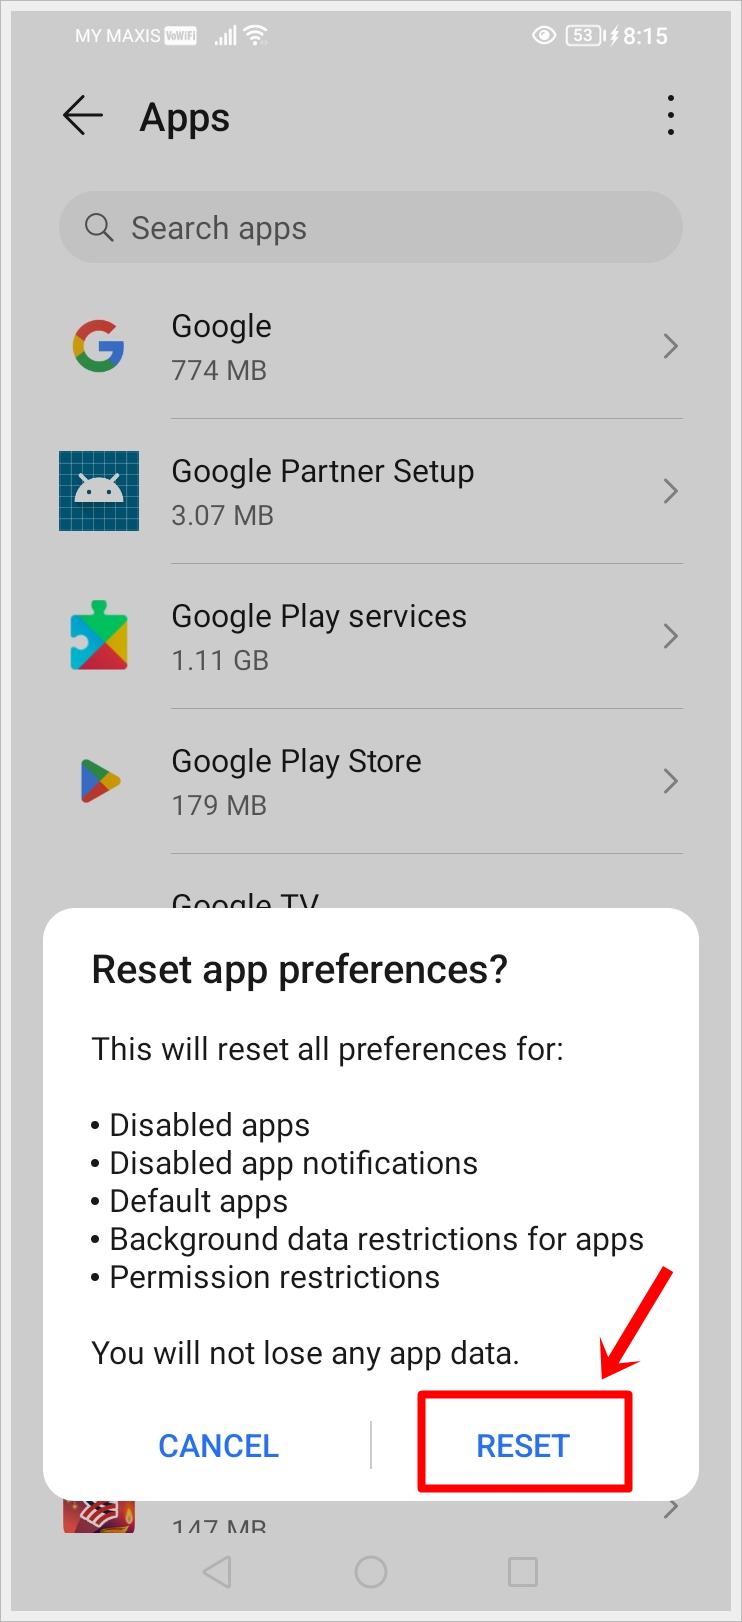 How to Fix "Google Play Services Keeps Stopping" Error: This image shows the "Apps" page on an Android phone. A "Reset app preferences" confirmation alert is shown with its "RESET" button highlighted.